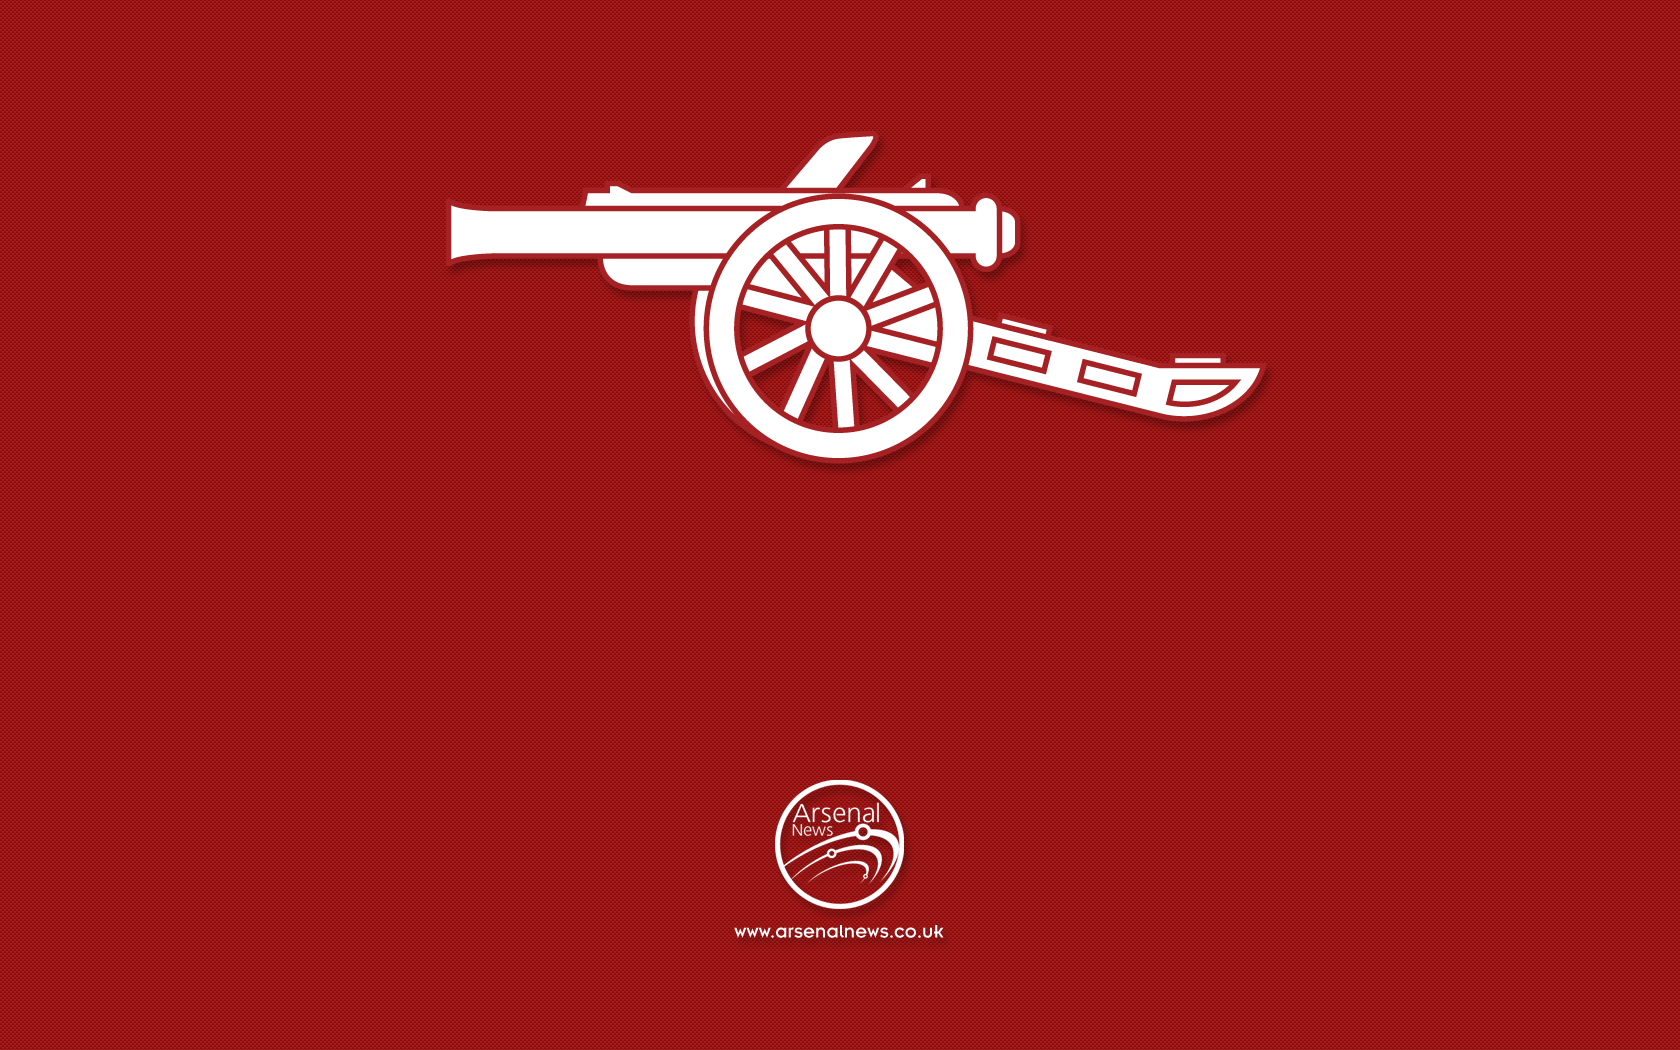 arsenal wallpaper mobile phones 2015 is high definition wallpaper you 1680x1050